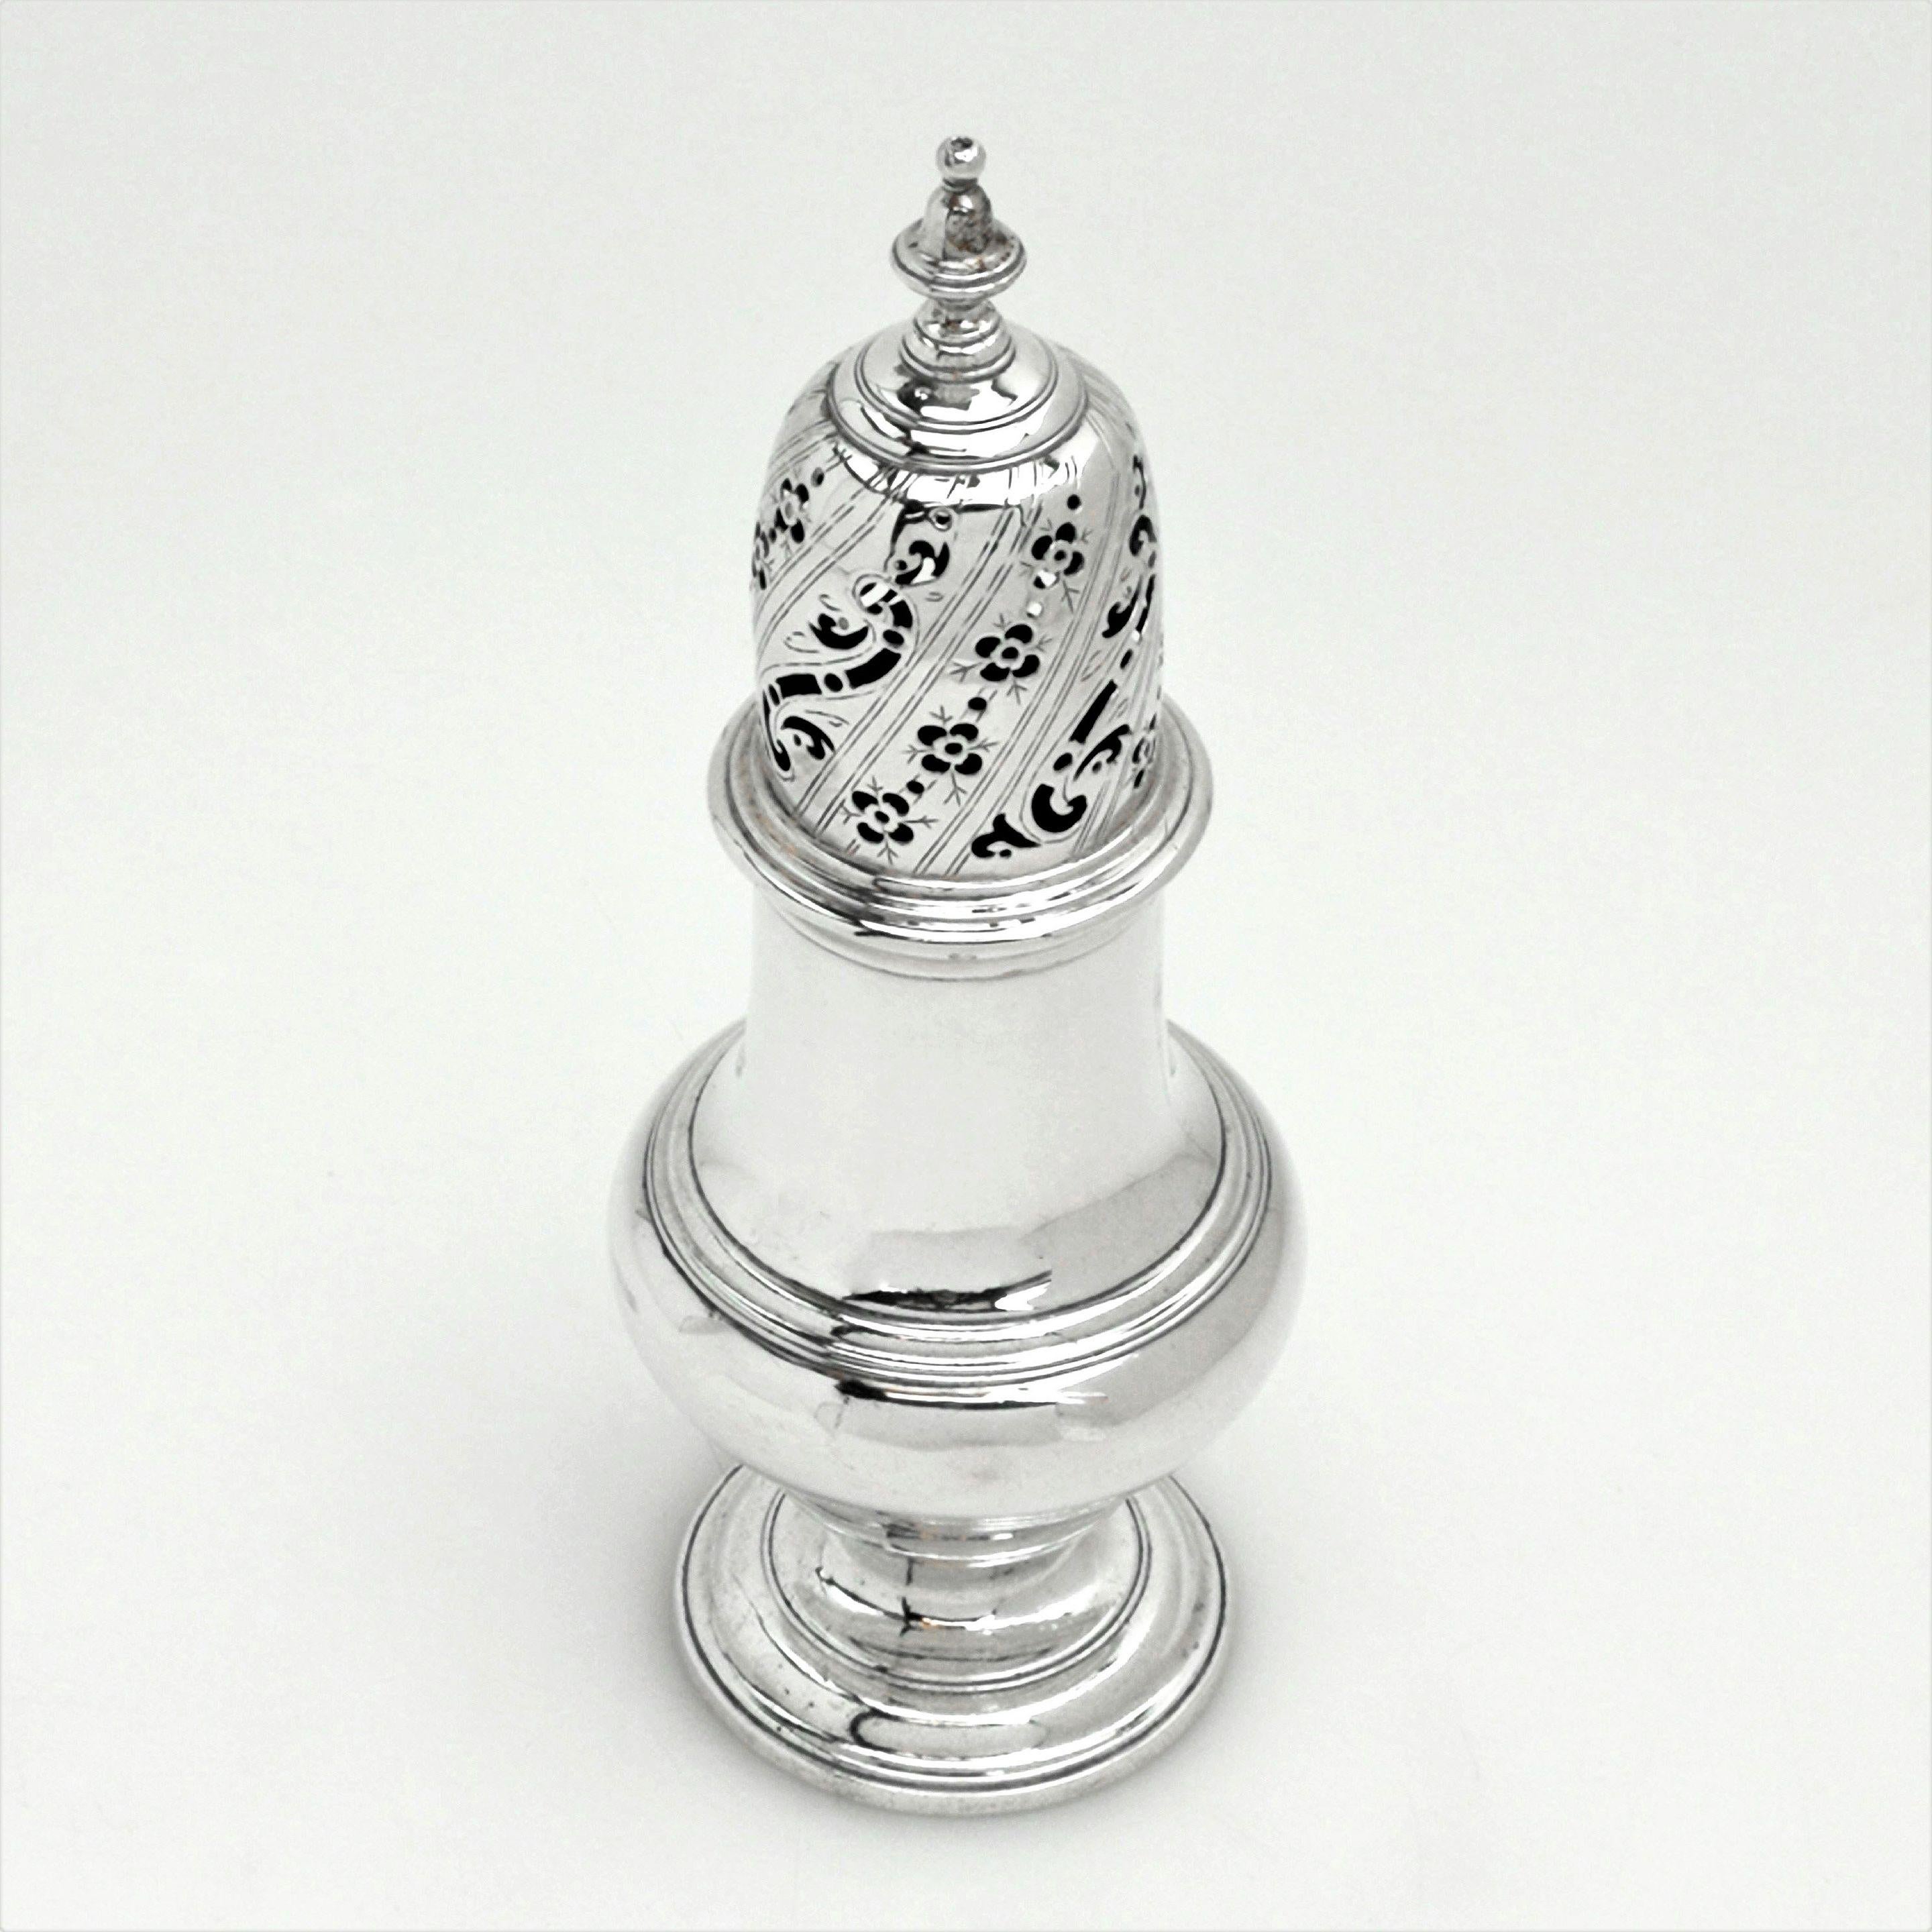 An antique George II Georgian silver sugar caster in a Classic baluster shape with a pierced push fit lid and standing on a spread foot. The caster has an armorial engraved on the side.
 
 Made in London in 1752 by John Delmestre.
 
Approx.